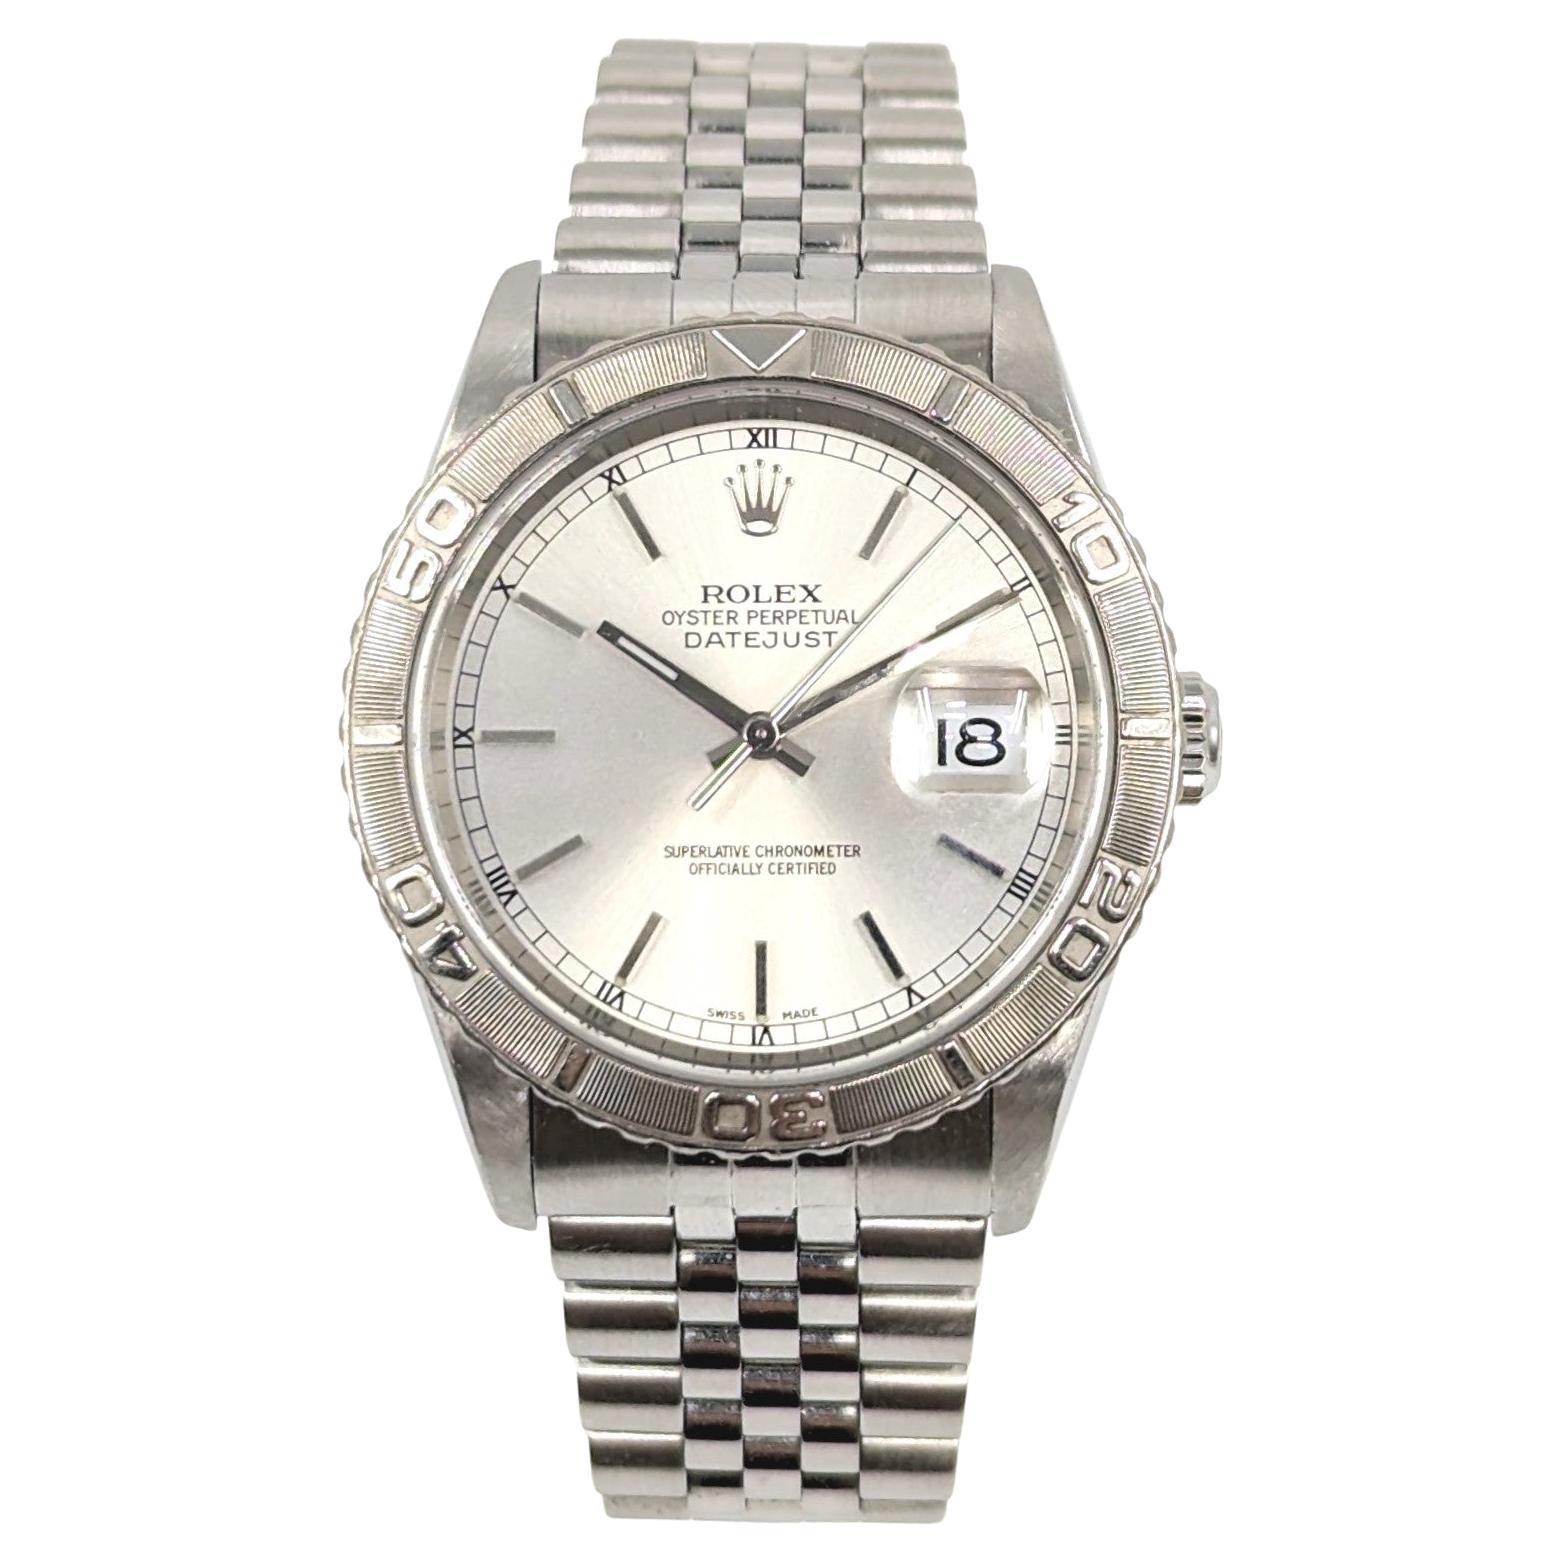 Rolex Oyster Perpetual Datejust 18k WG/SS Turn-o-graph Watch Thunderbird 16264 For Sale